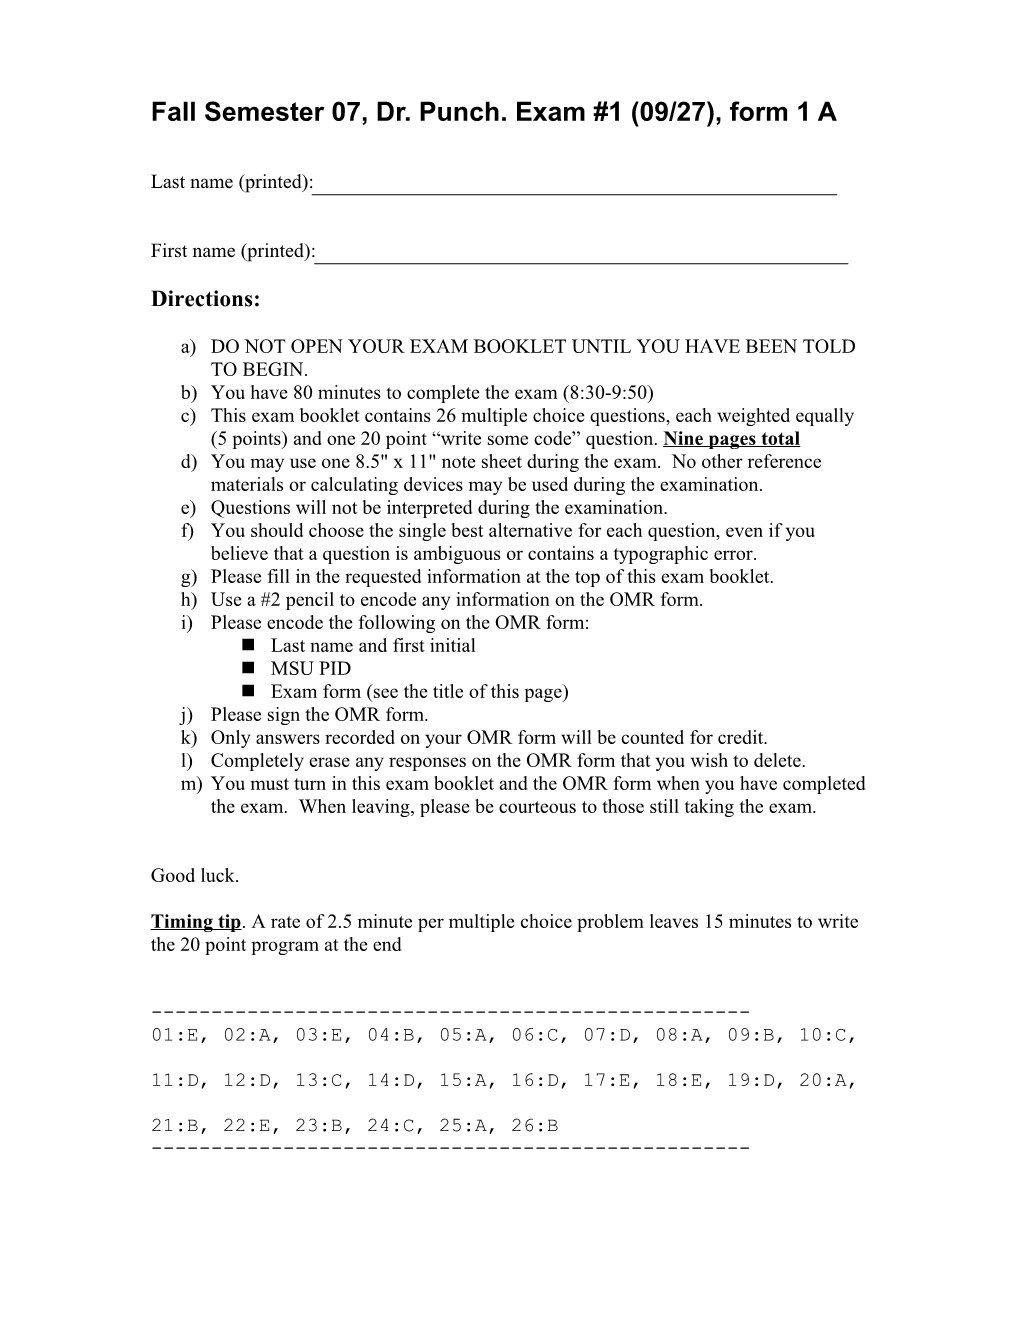 Fall Semester 07, Dr. Punch. Exam #1 (09/27), Form 1 A